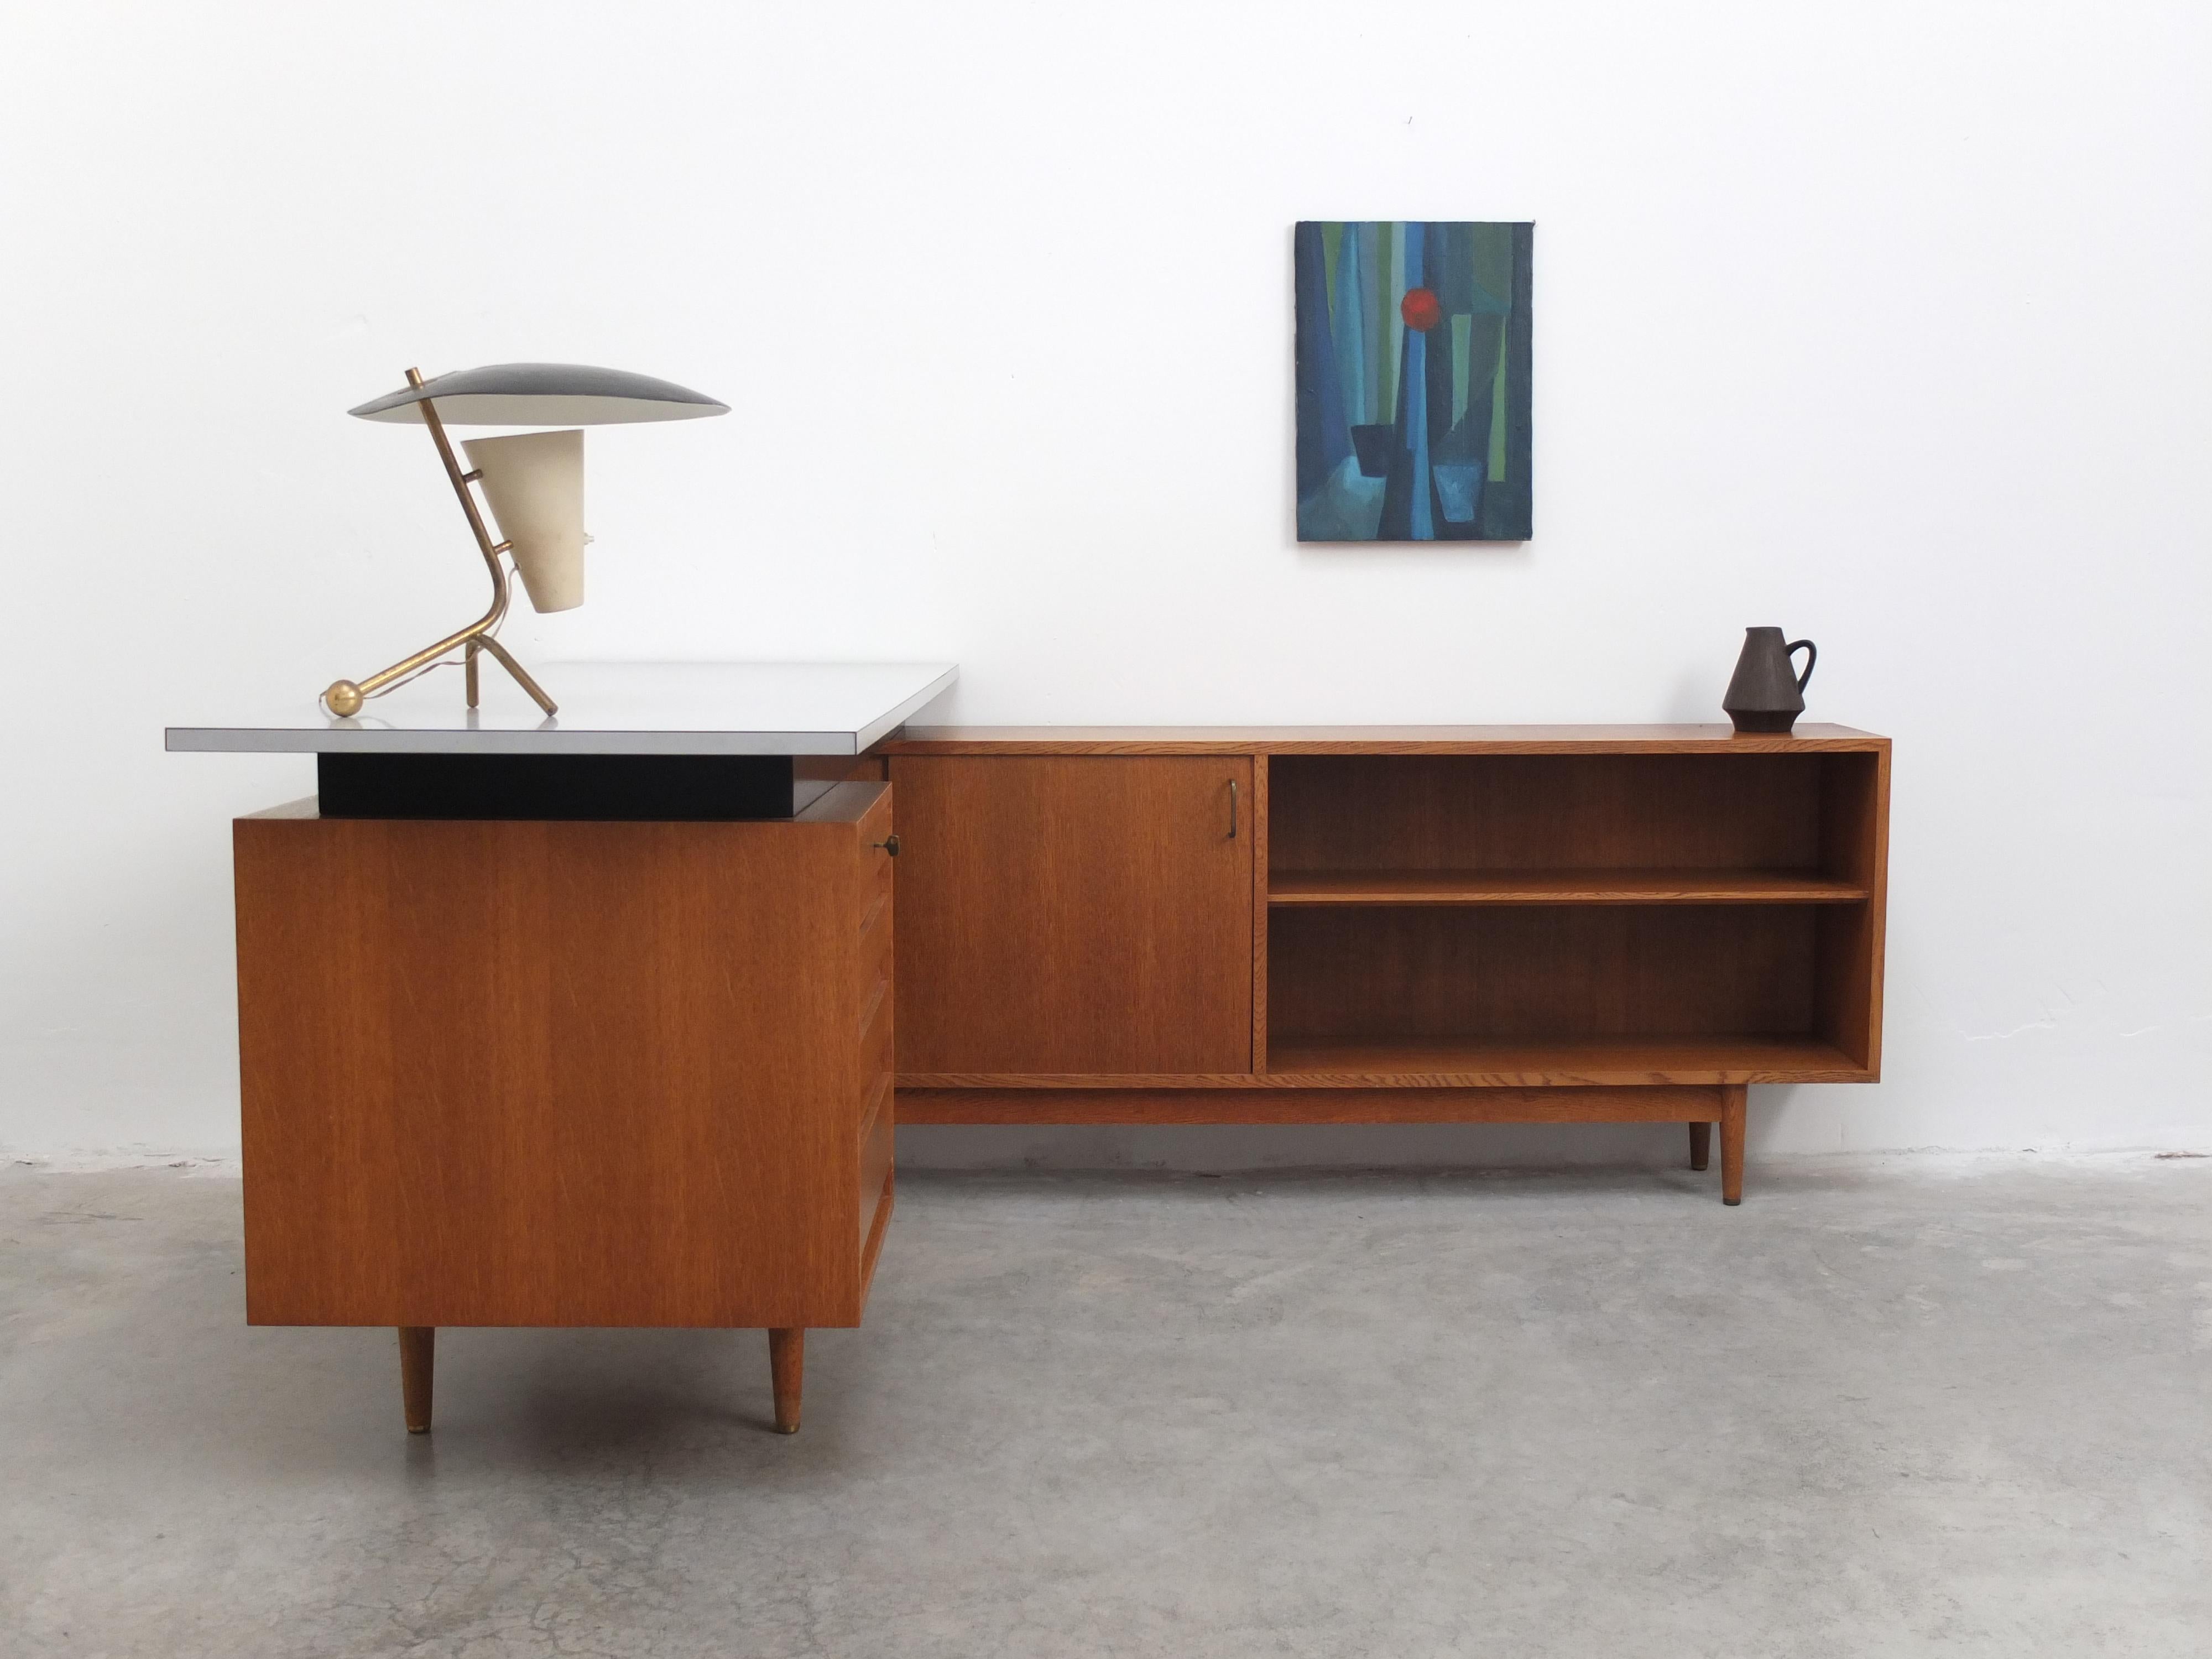 Fantastic writing desk from the ‘Abtracta’ series designed by Jos De Mey and produced in Belgium by Van Den Berghe-Pauvers during the 1960s. This rare L-shaped desk features a sideboard and one drawer cabinet made of oak with a great patina thanks